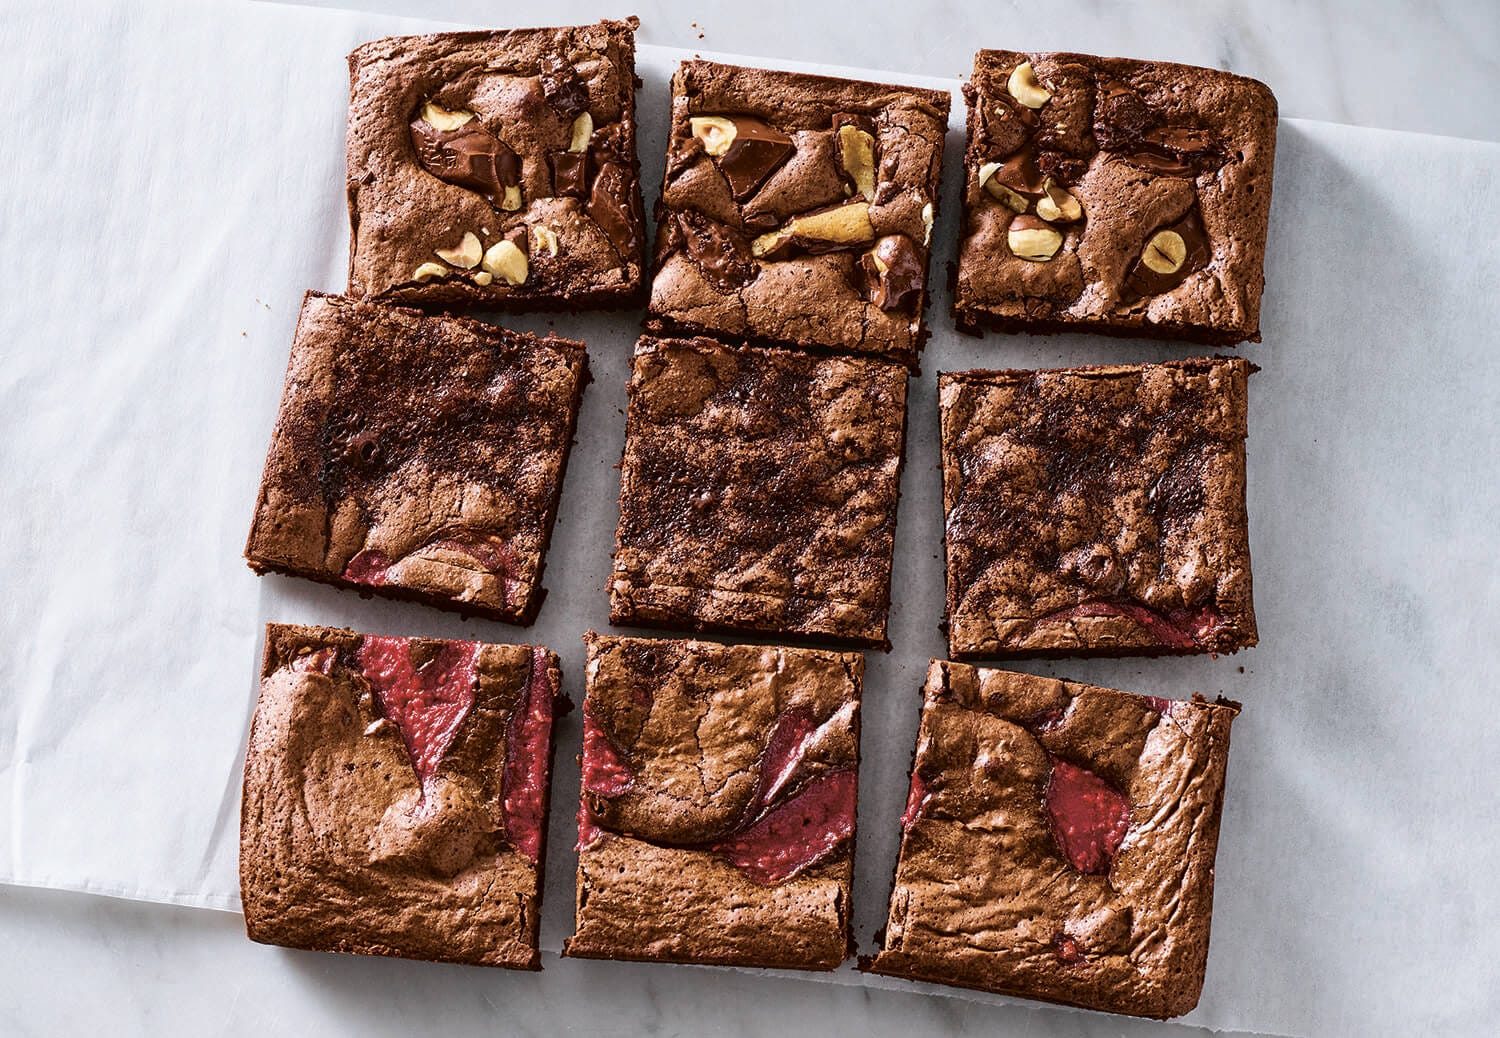 Brownies Recipe - NYT Cooking